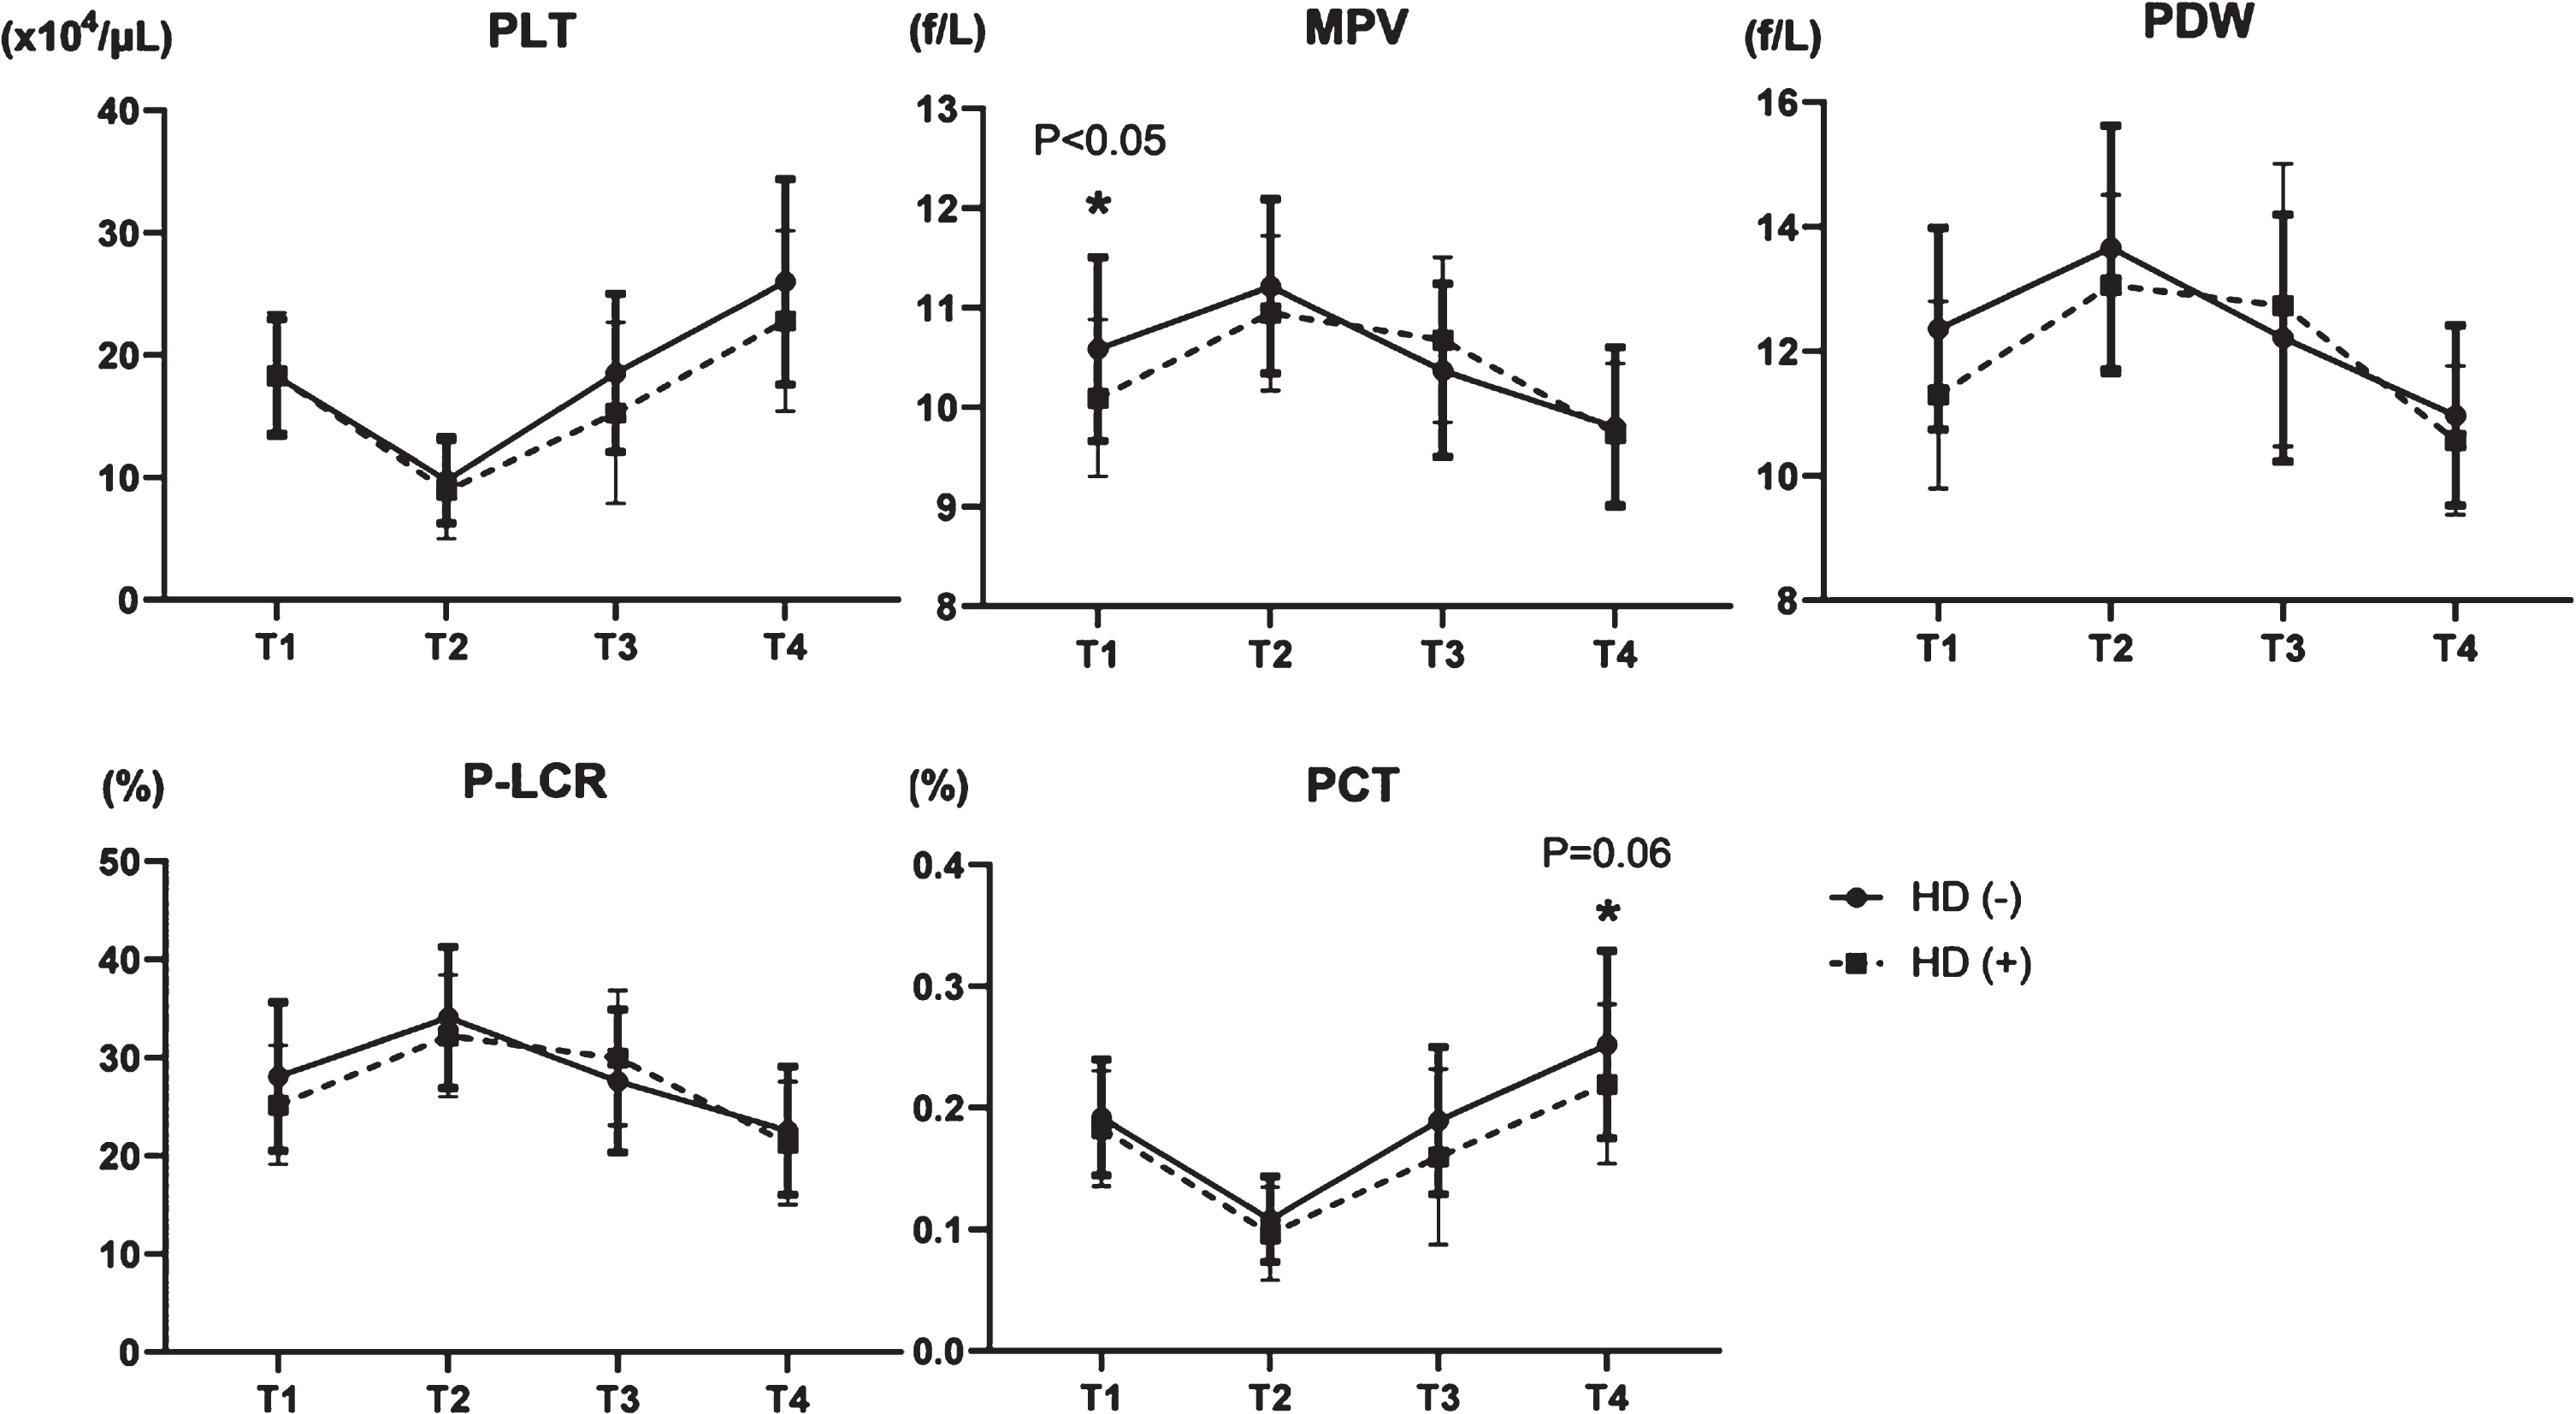 Transition of five platelet factors in patients not on hemodialysis (HD (–)) or dialysis patients (HD (+)). PLT: platelet count, MPV: mean platelet volume, PDW: platelet distribution width, P-LCR: platelet large cell ratio, and PCT: plateletcrit.